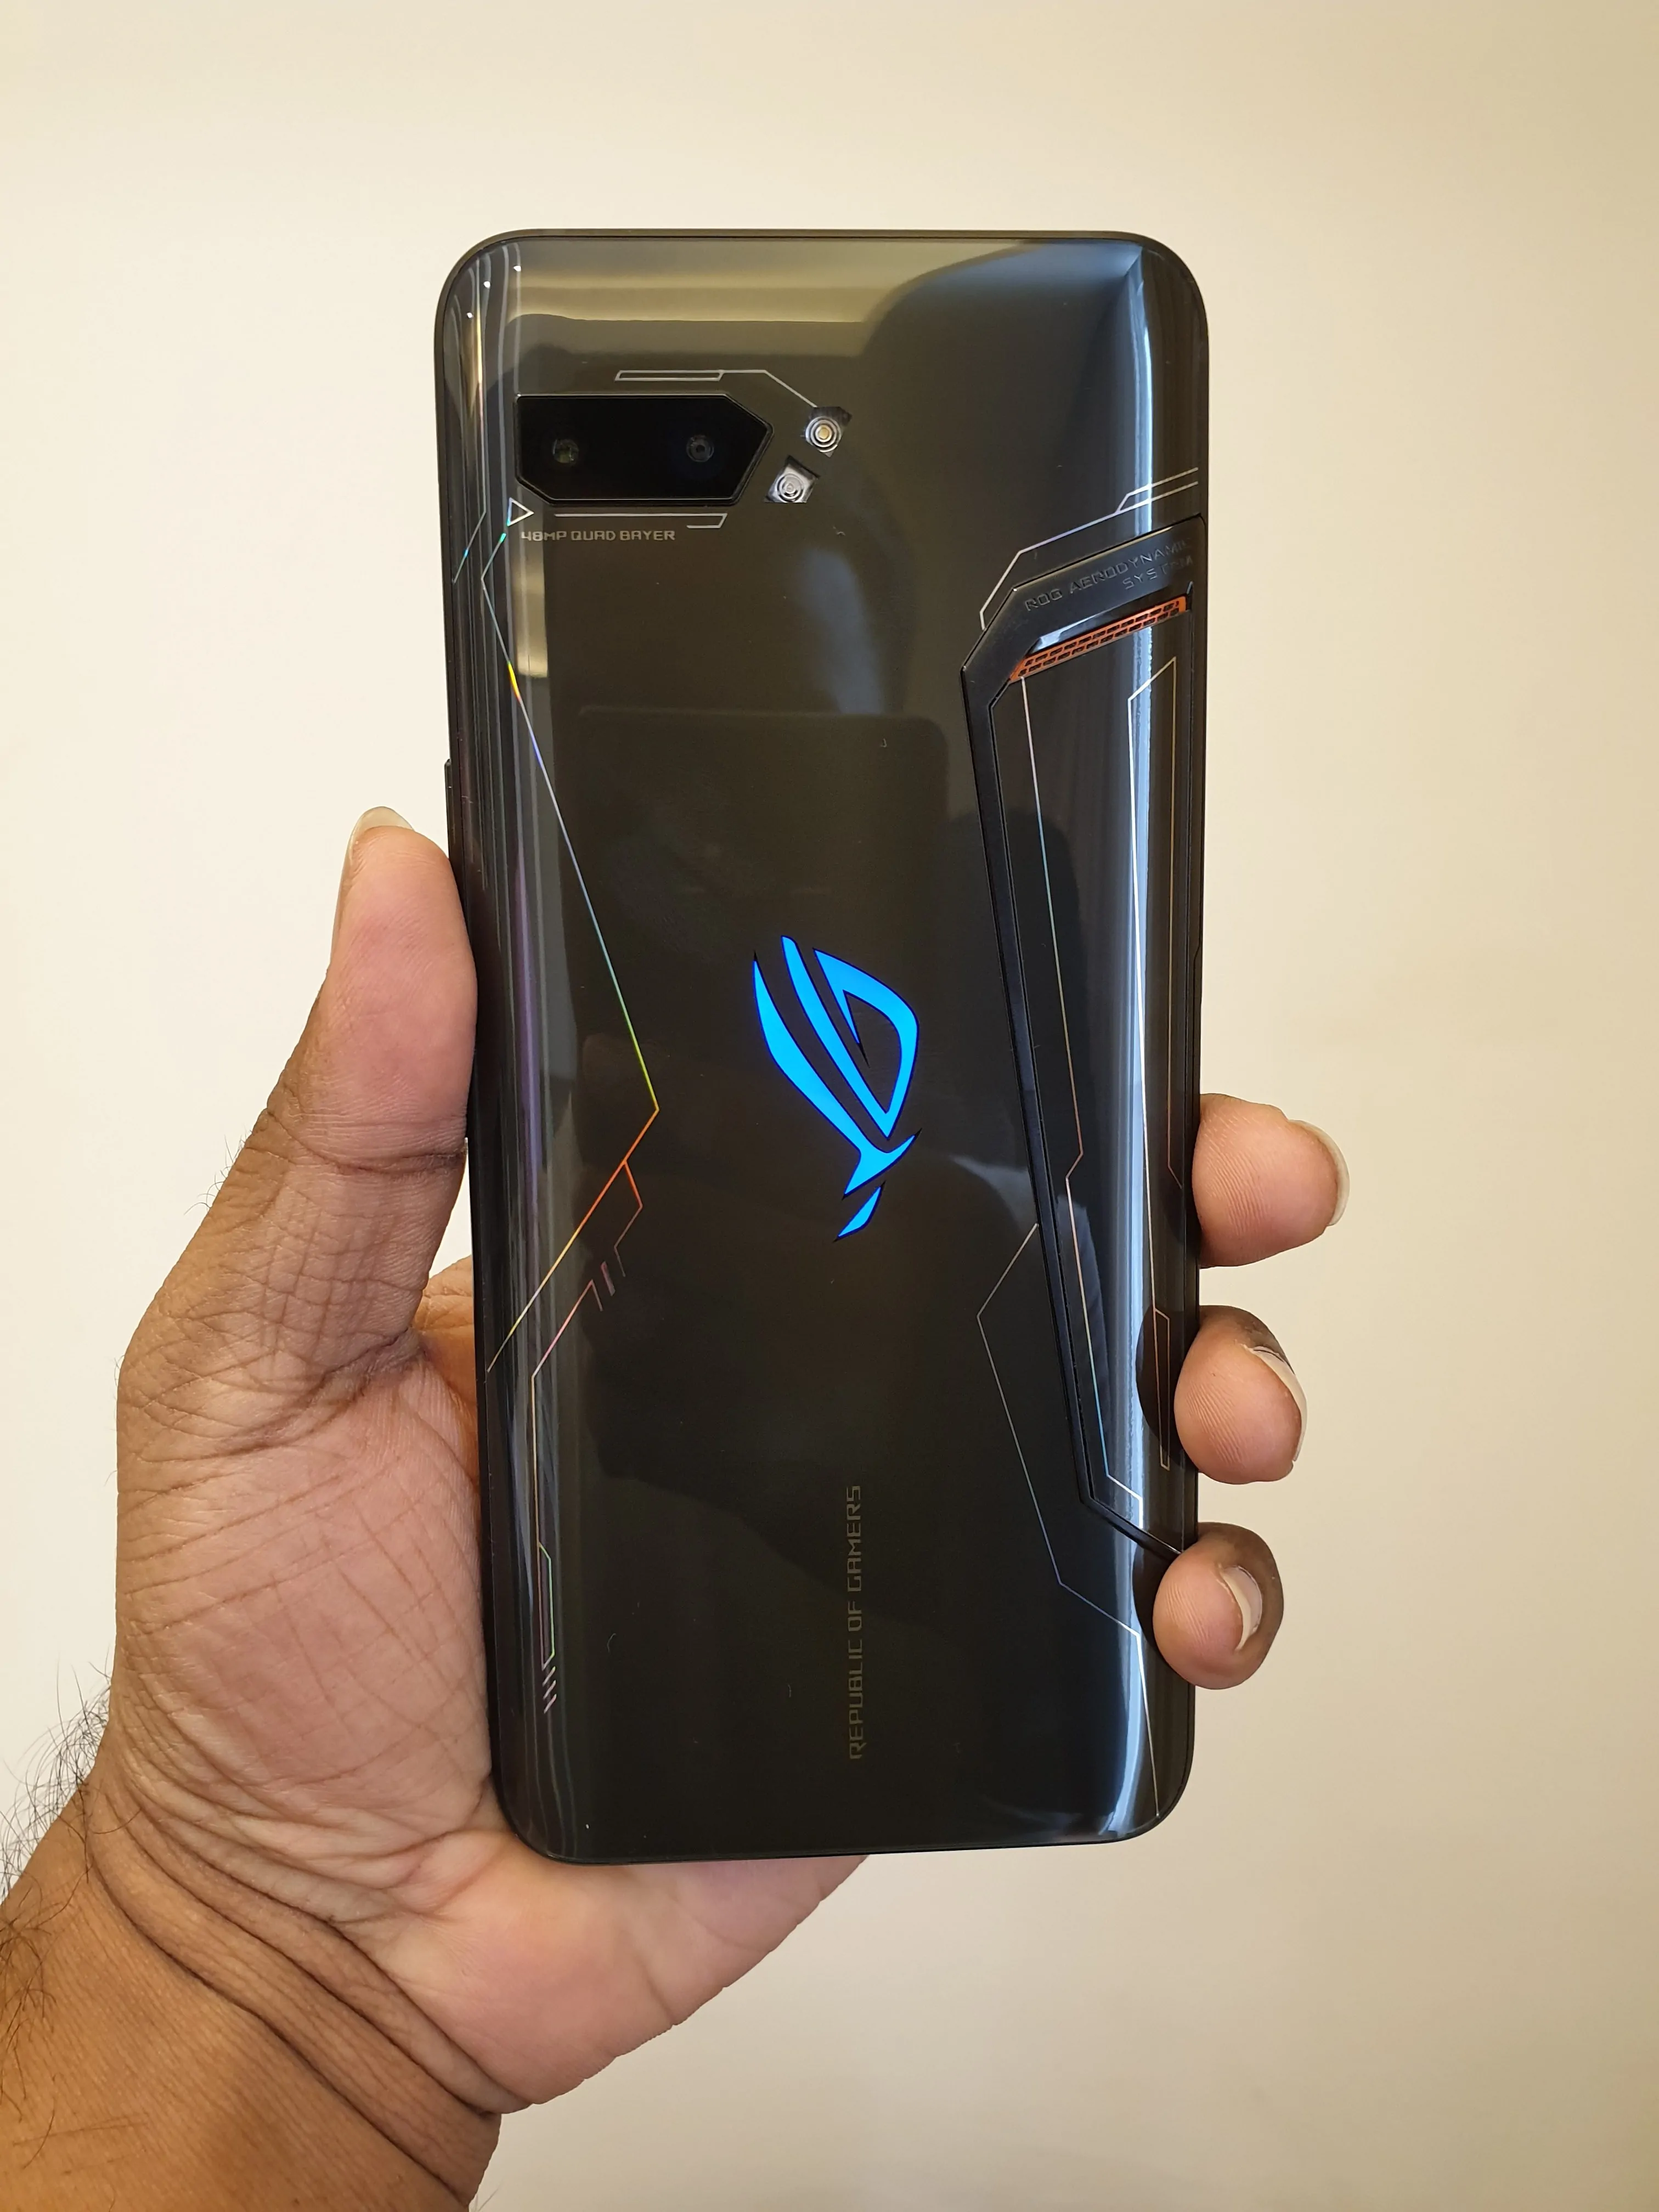 ROG Phone II Hands-on Review - My First Impressions On the Next-Gen Gaming Phone - 6